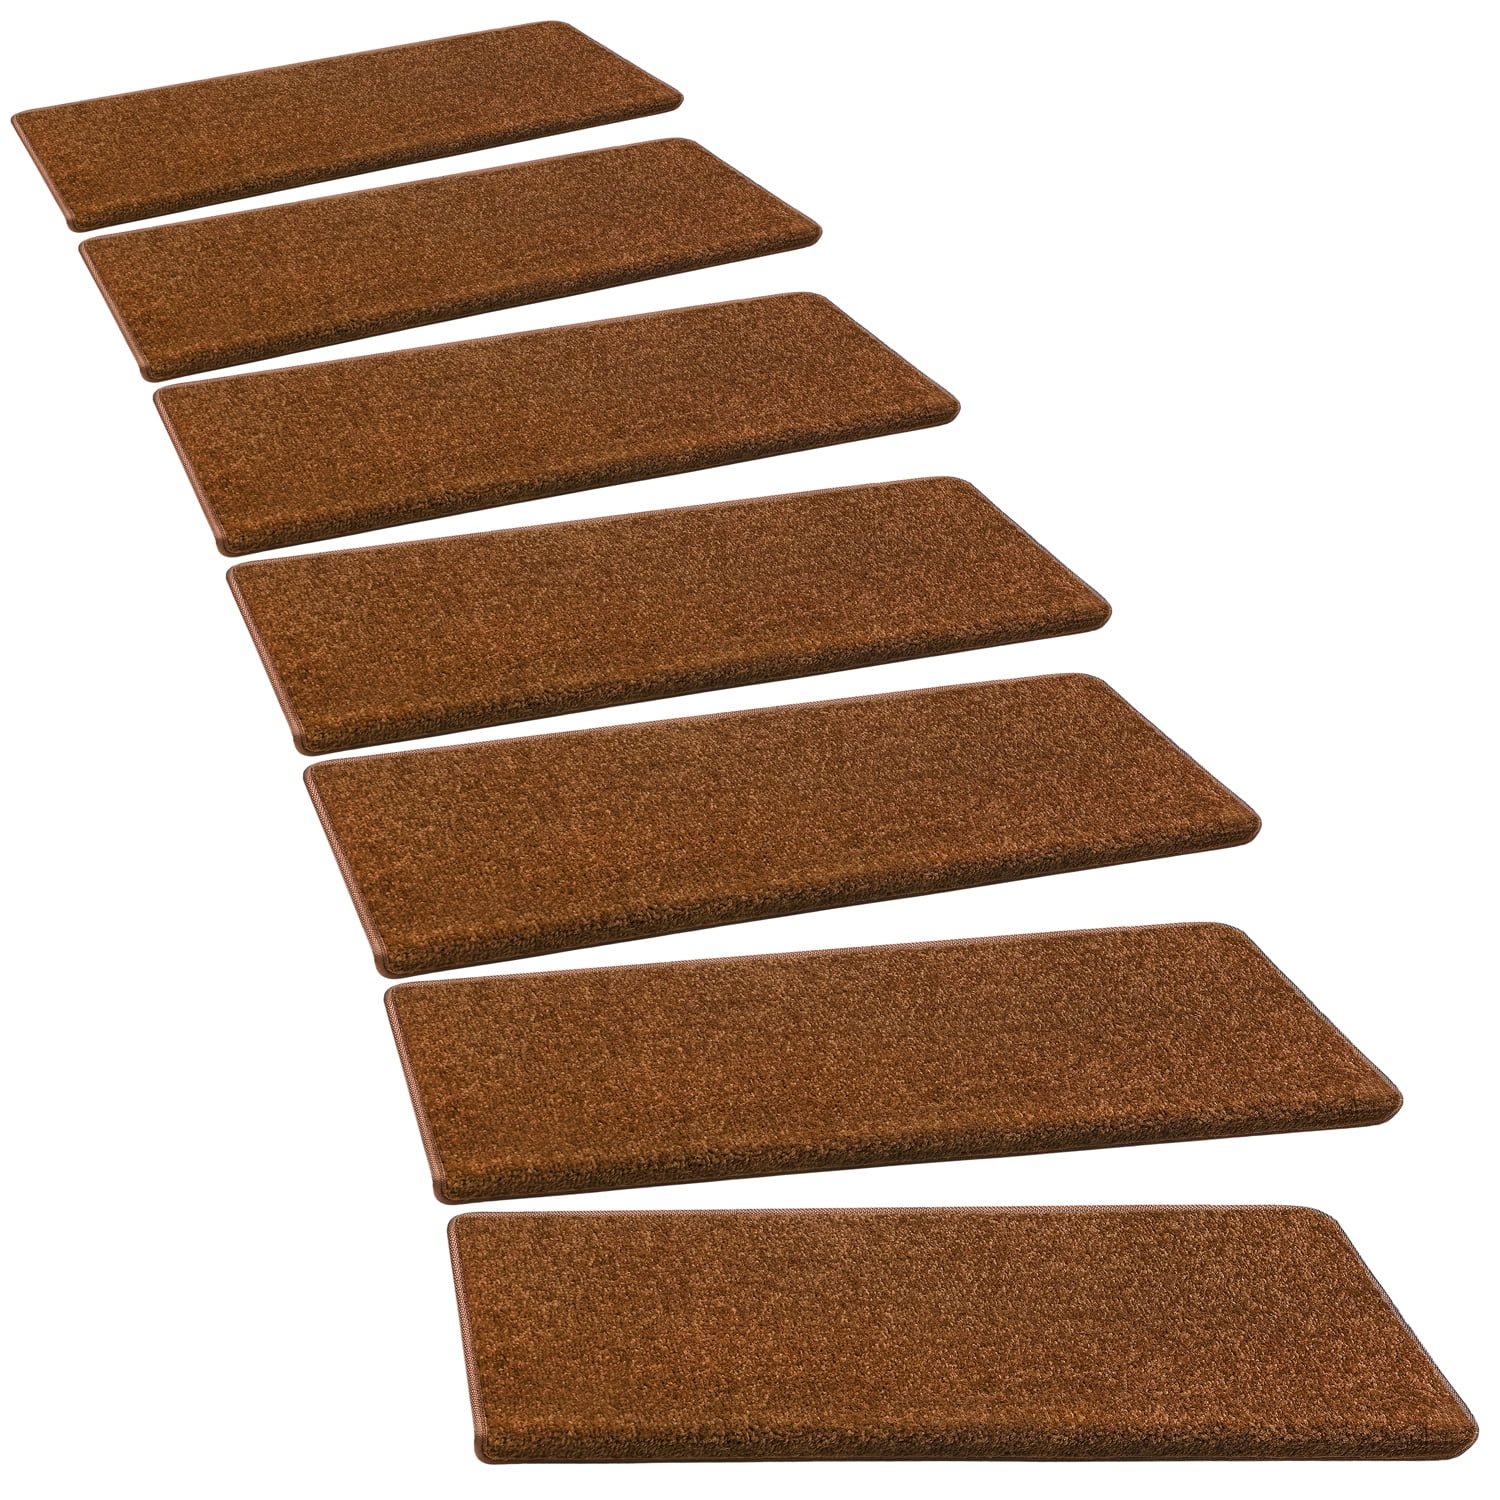 x1 ea Anti slide Non slip adhesive tape on wooden,steel and stone steps stair 